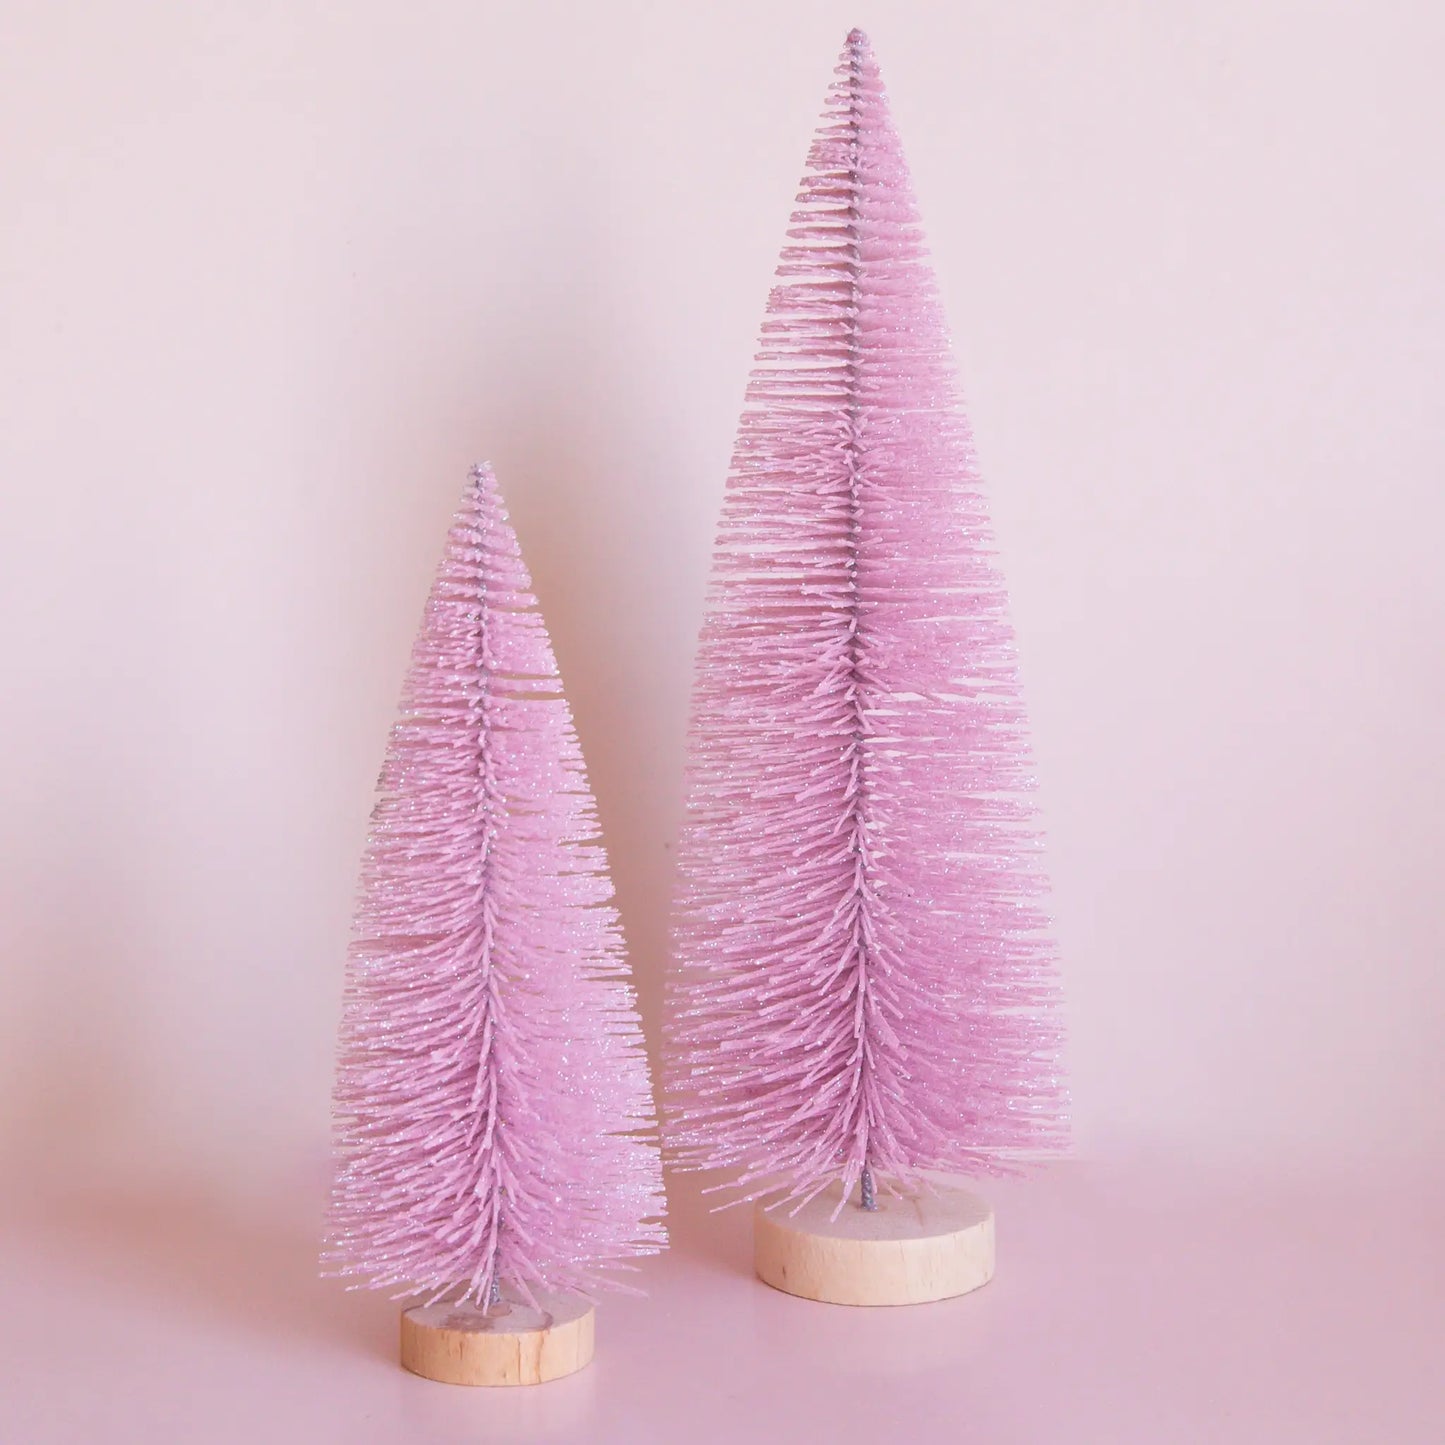 Bottle Brush Tree - Cool Pink (Sparkle Christmas Tree): 9 inch